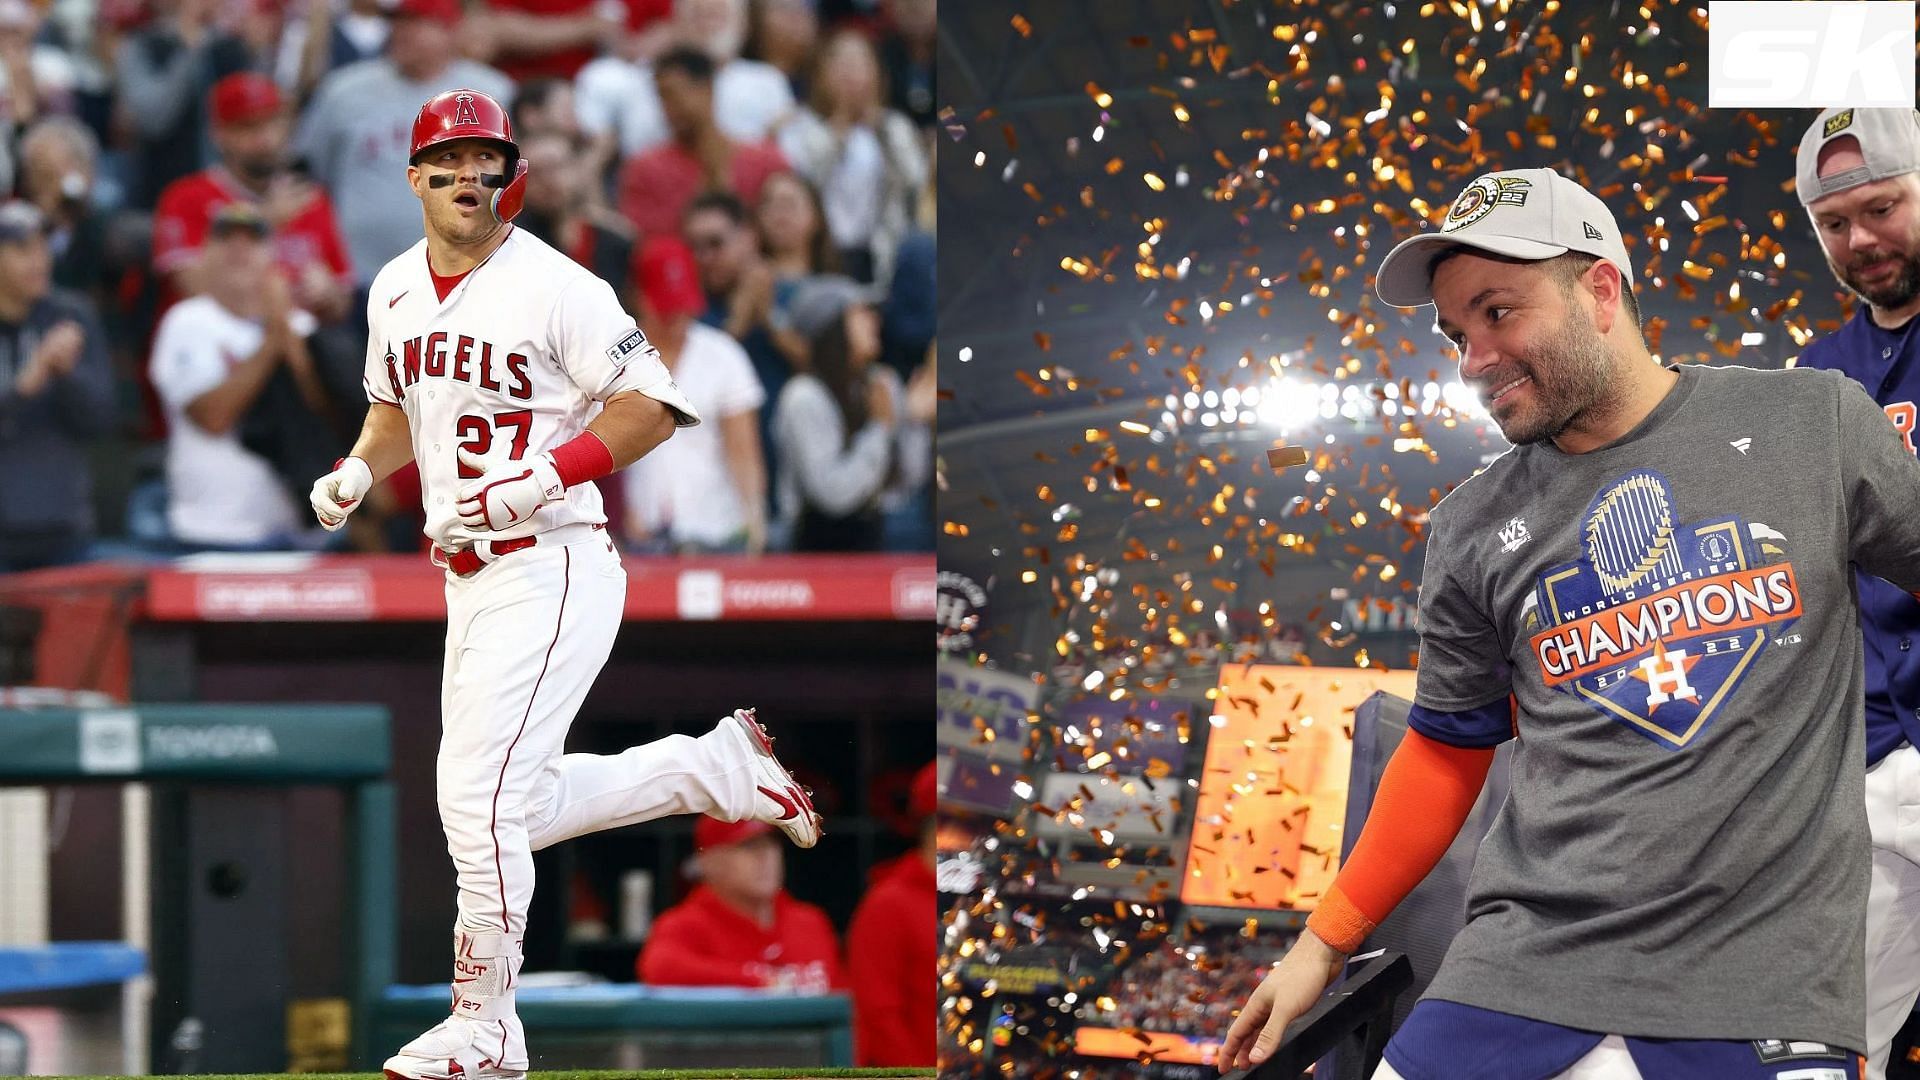 When Mike Trout unleashed furiously rant aimed at Houston Astros for holding on to tainted World Series title